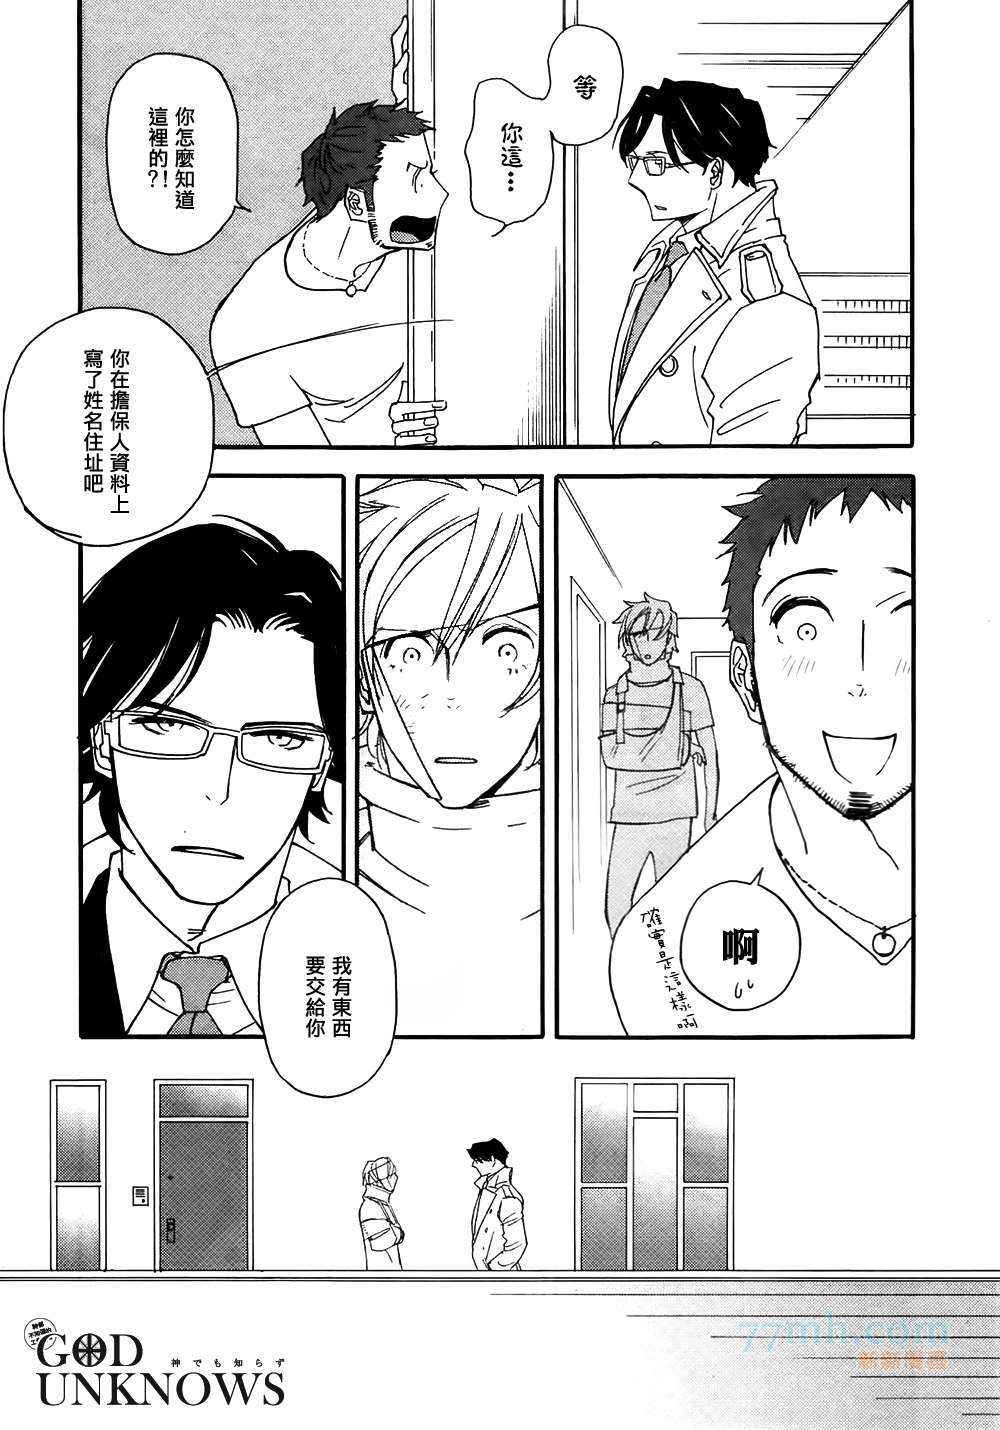 《Lost and Found》漫画 Found 003集